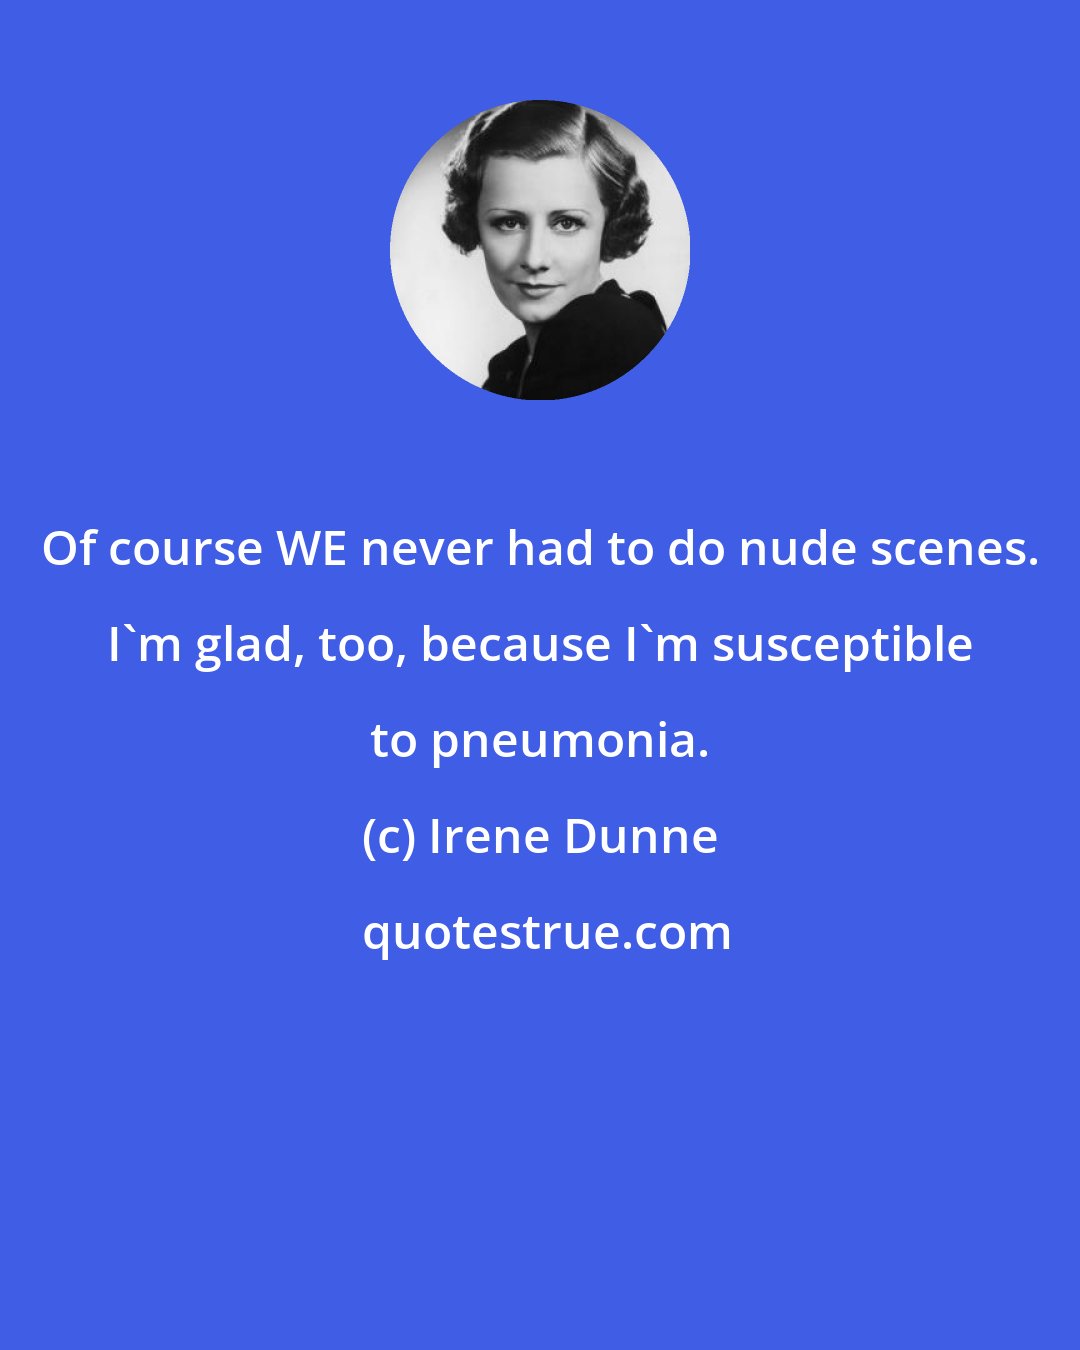 Irene Dunne: Of course WE never had to do nude scenes. I'm glad, too, because I'm susceptible to pneumonia.